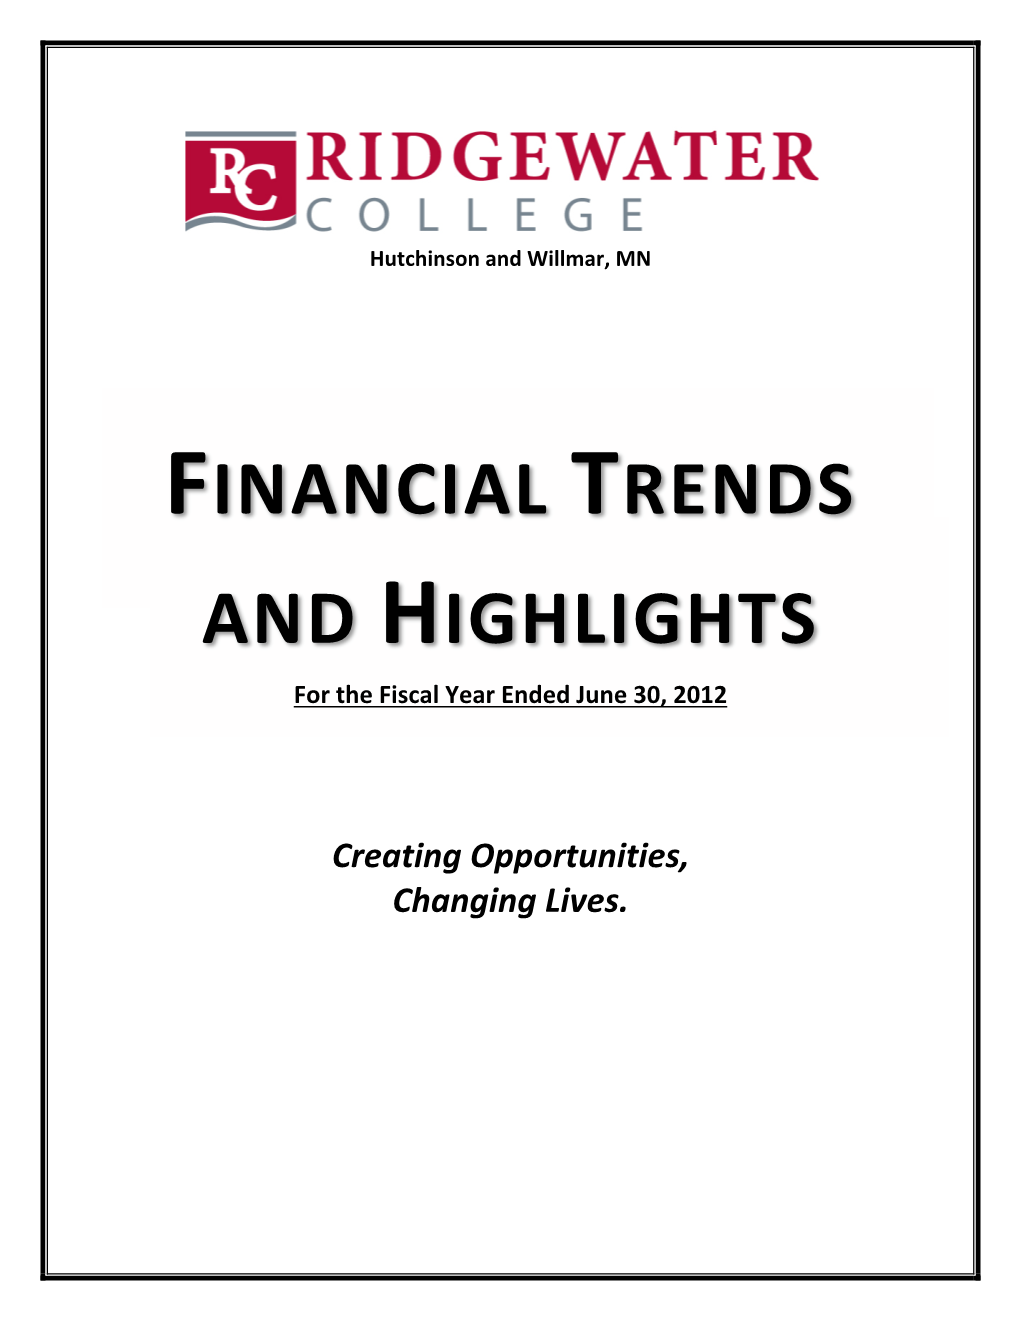 FINANCIAL TRENDS and HIGHLIGHTS for the Fiscal Year Ended June 30, 2012